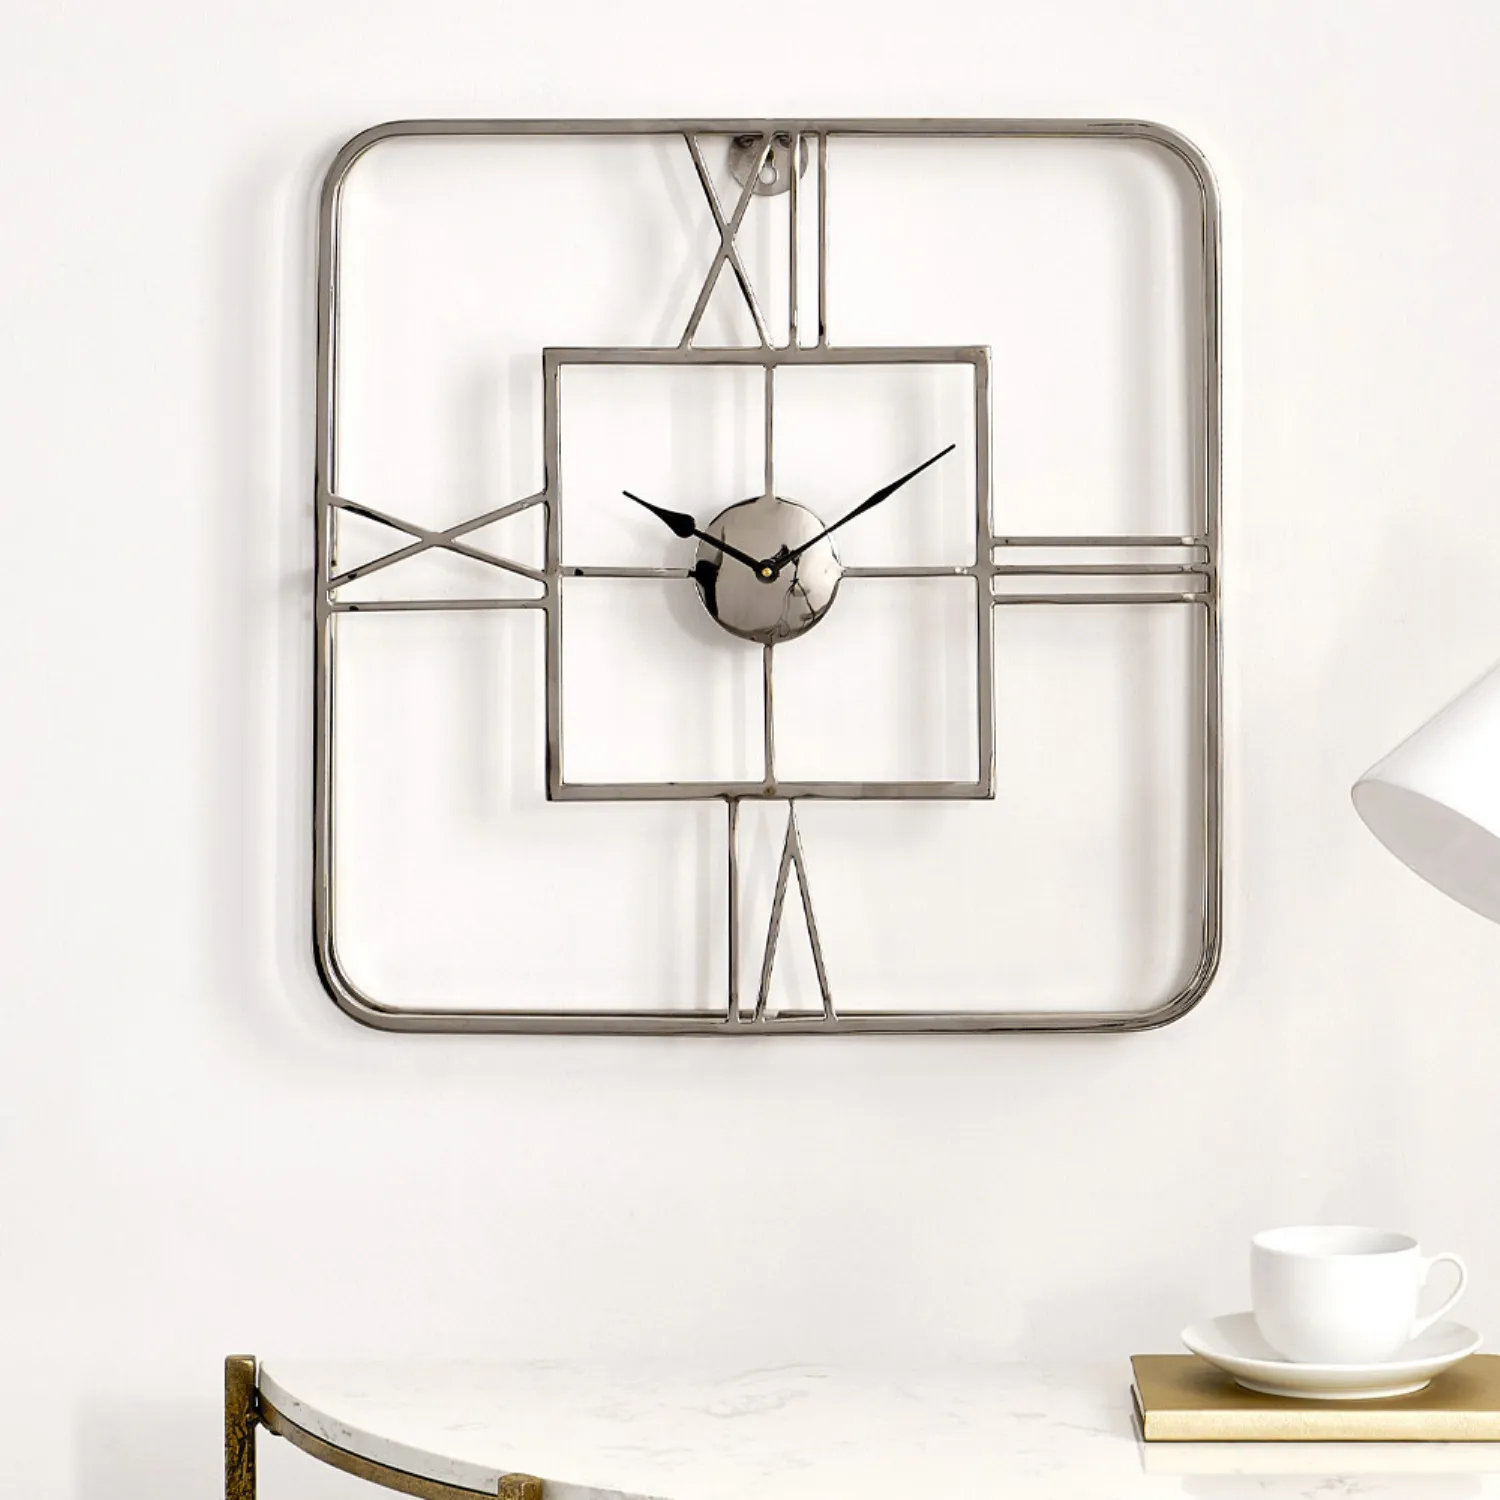 Retro Silver Metal Double Framed Square Wall Clock